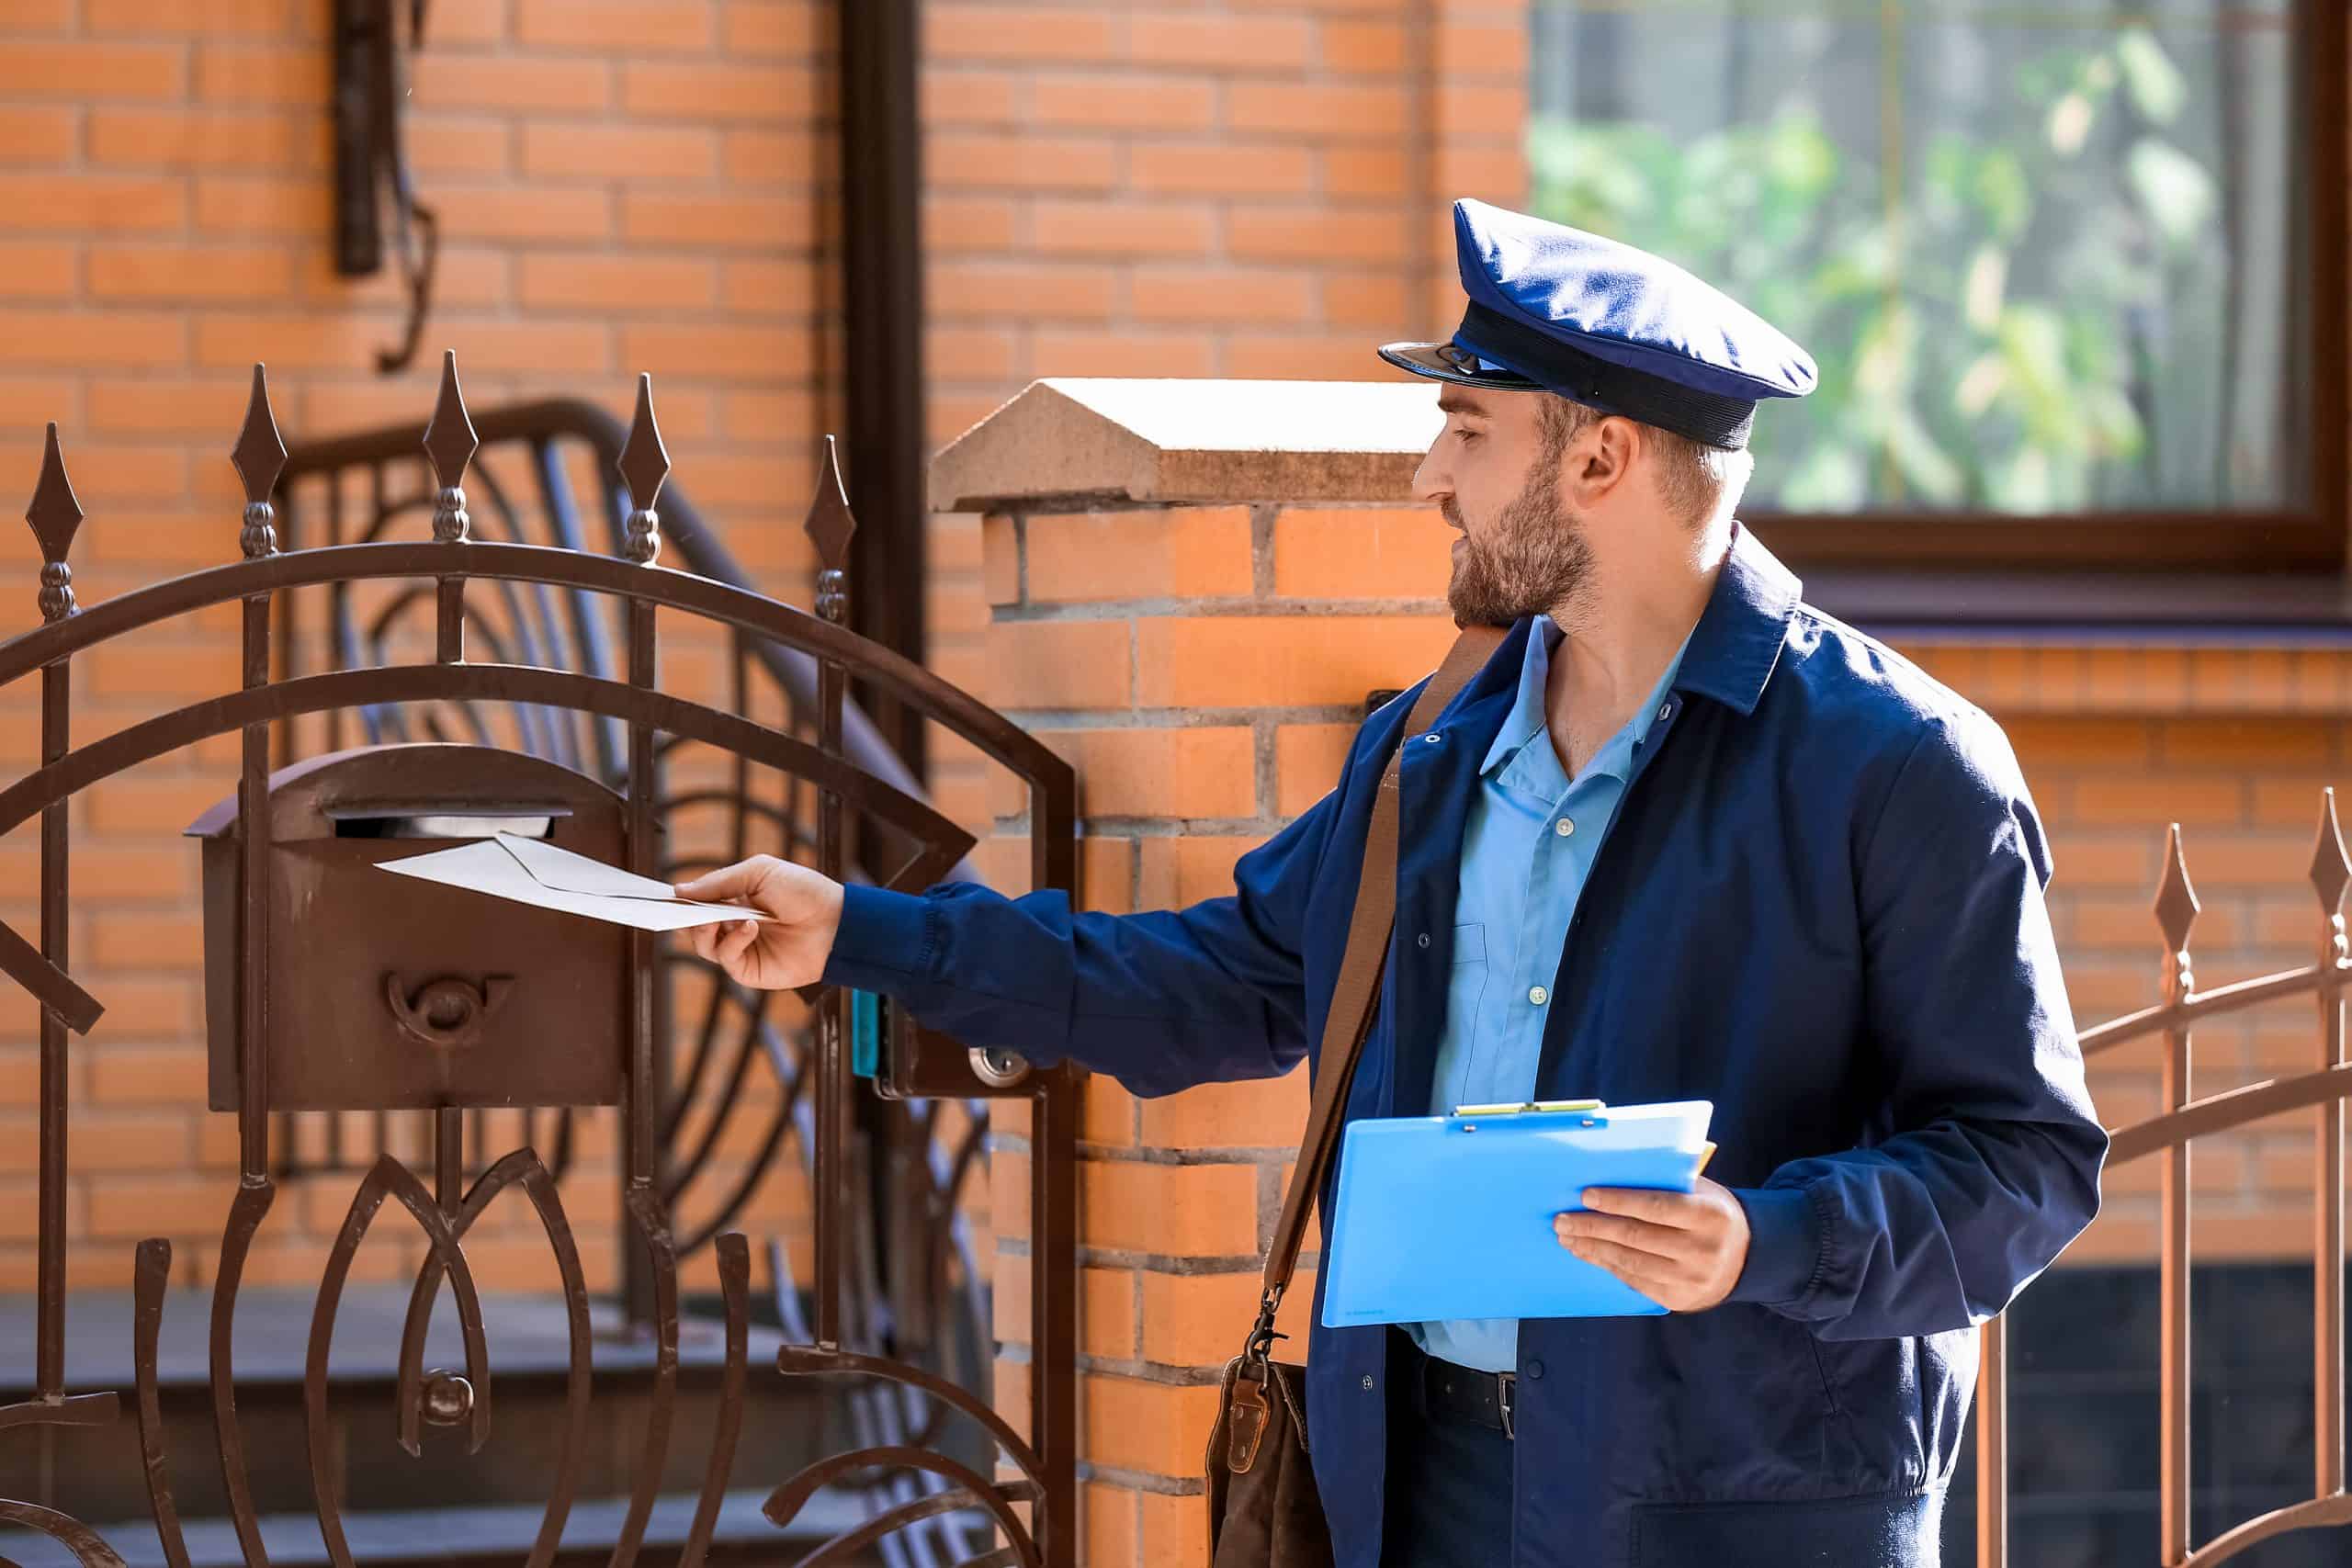 Mailman delivering mail at a house